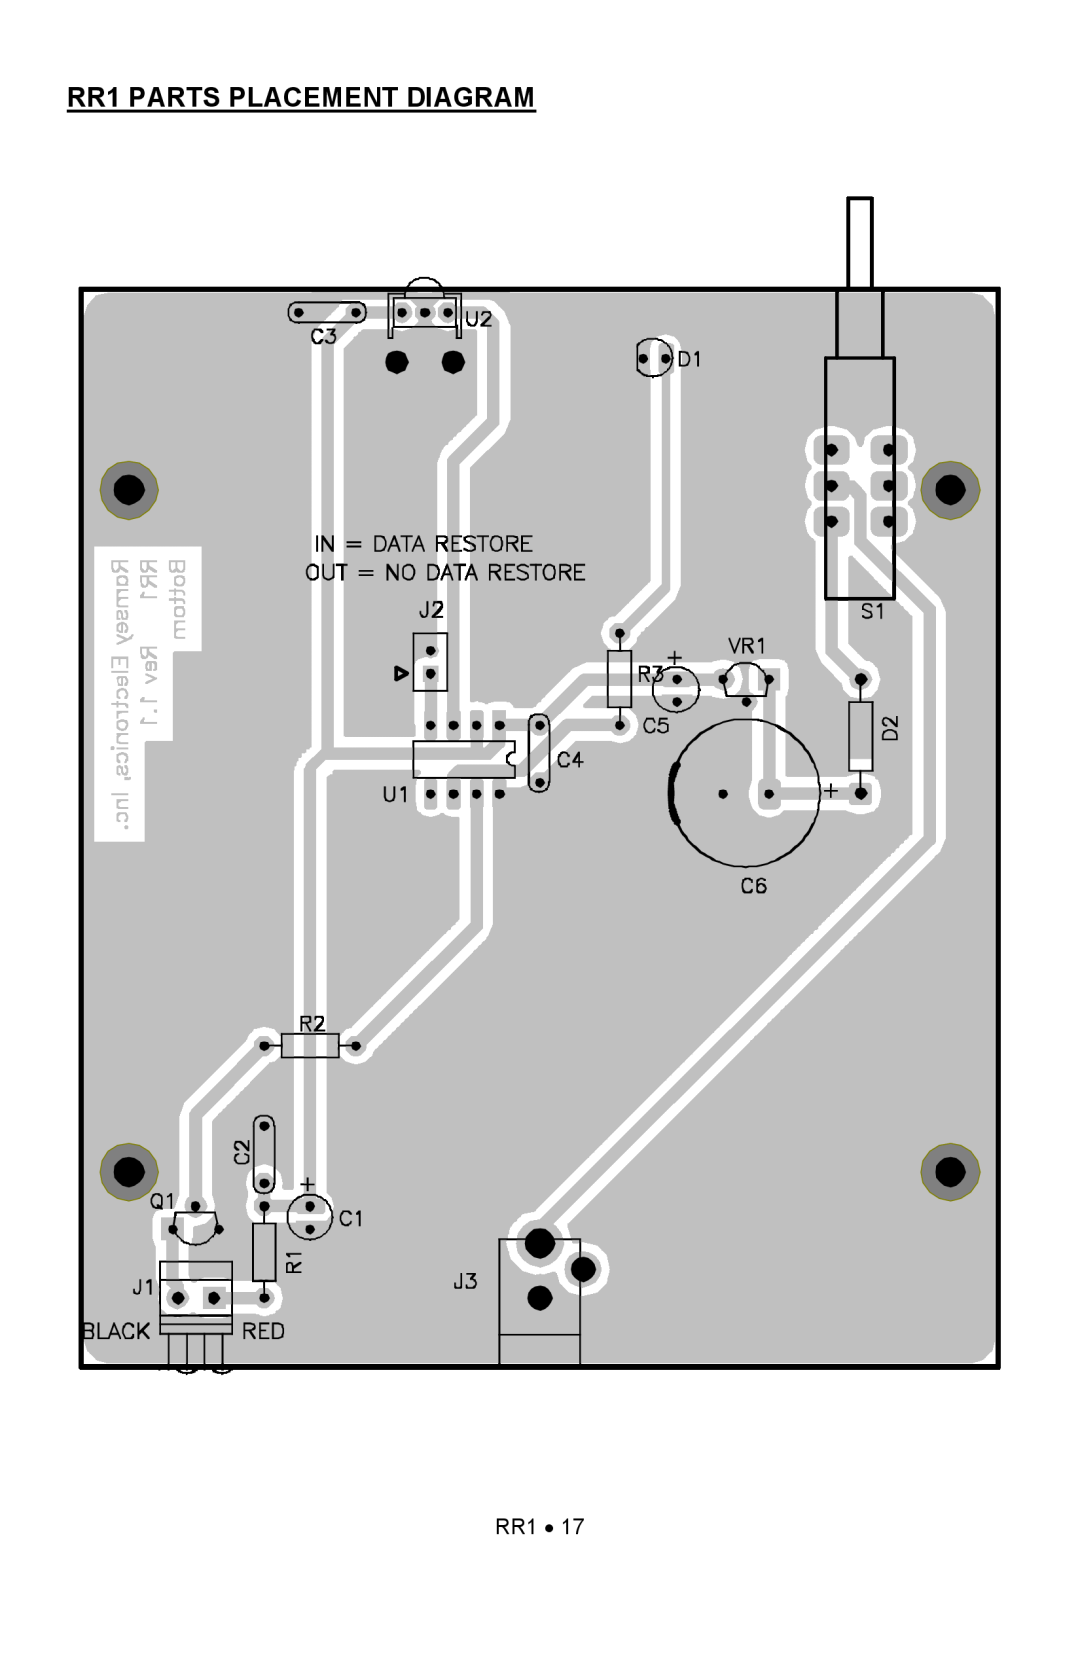 Ramsey Electronics manual RR1 PARTS PLACEMENT DIAGRAM 